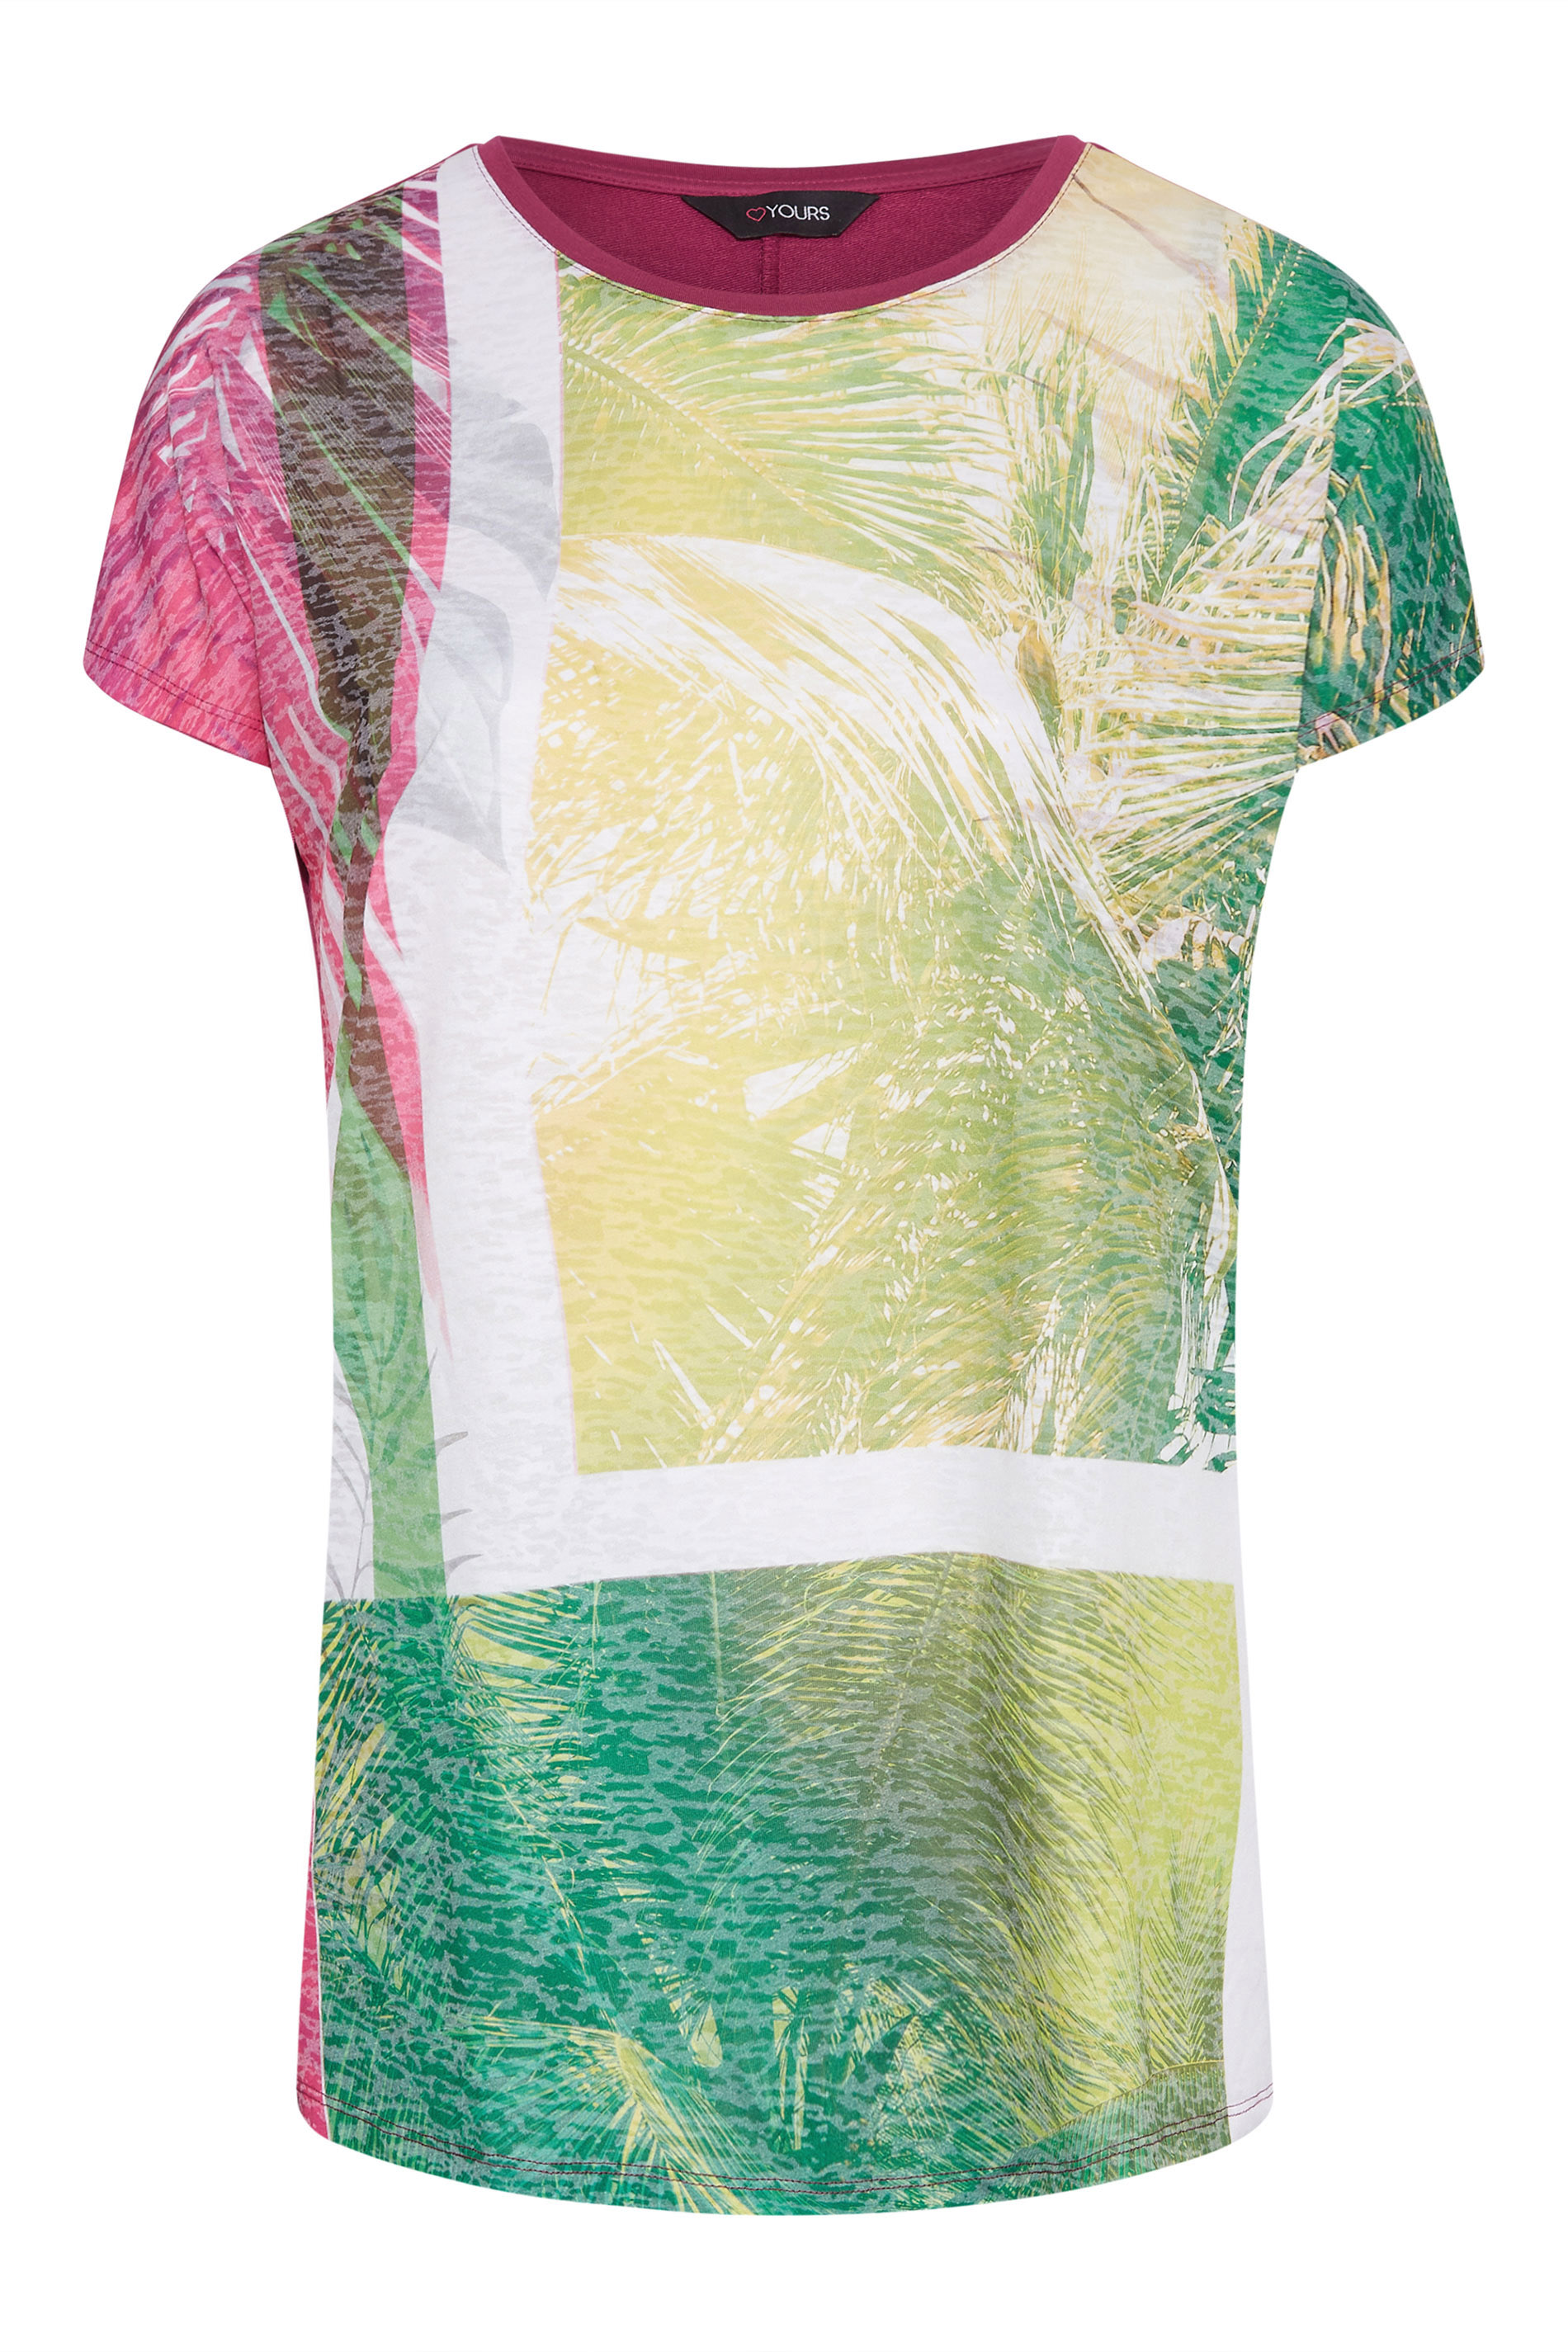 Grande taille  Tops Grande taille  Tops Jersey | T-Shirt Rose & Vert Tropical - XW76878